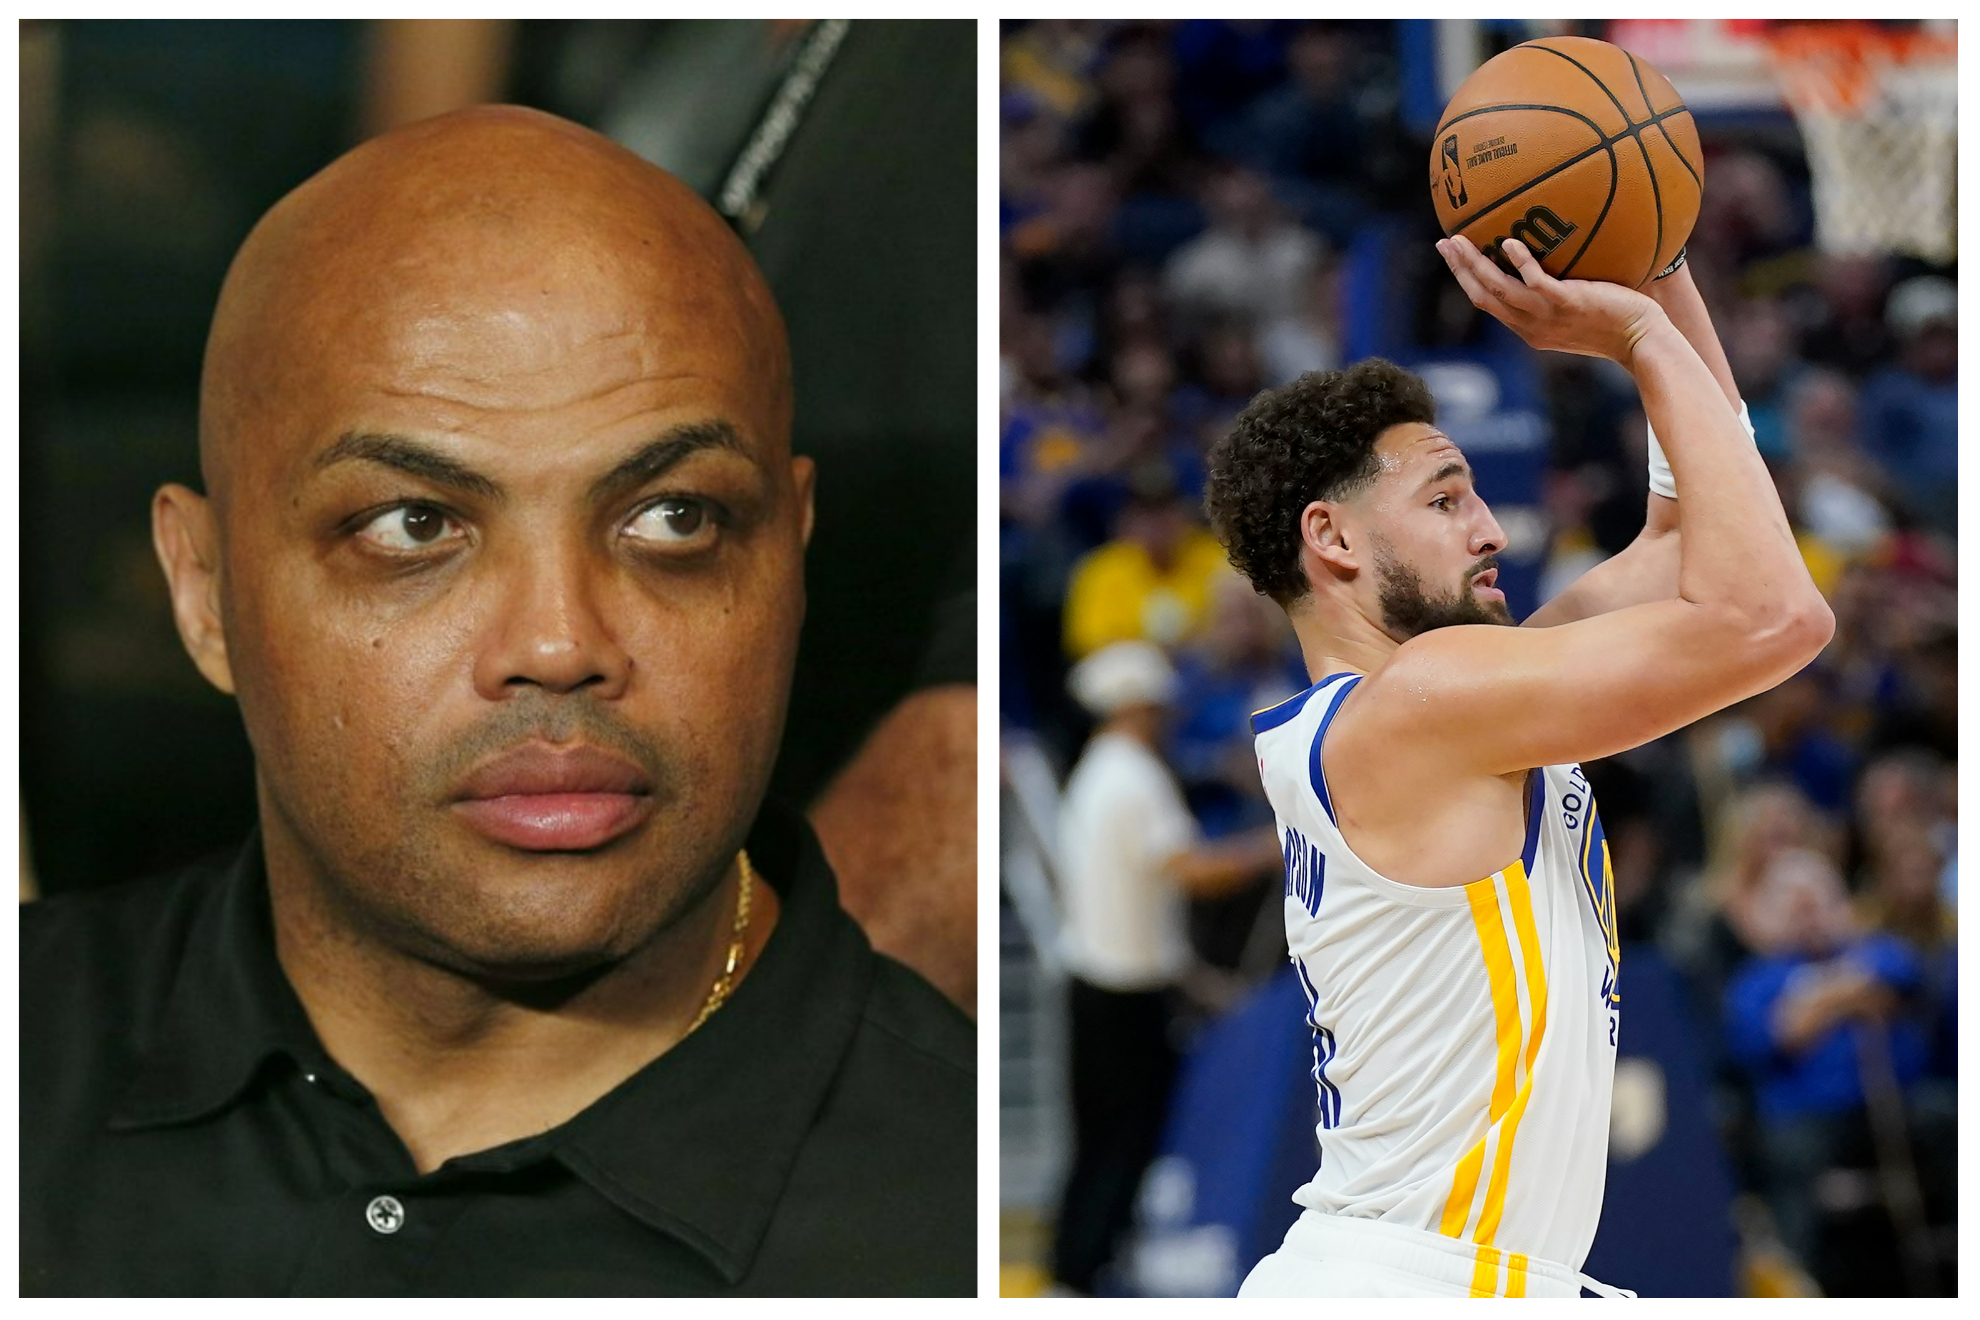 Charles Barkley has been very critical of Klay Thompson lately.